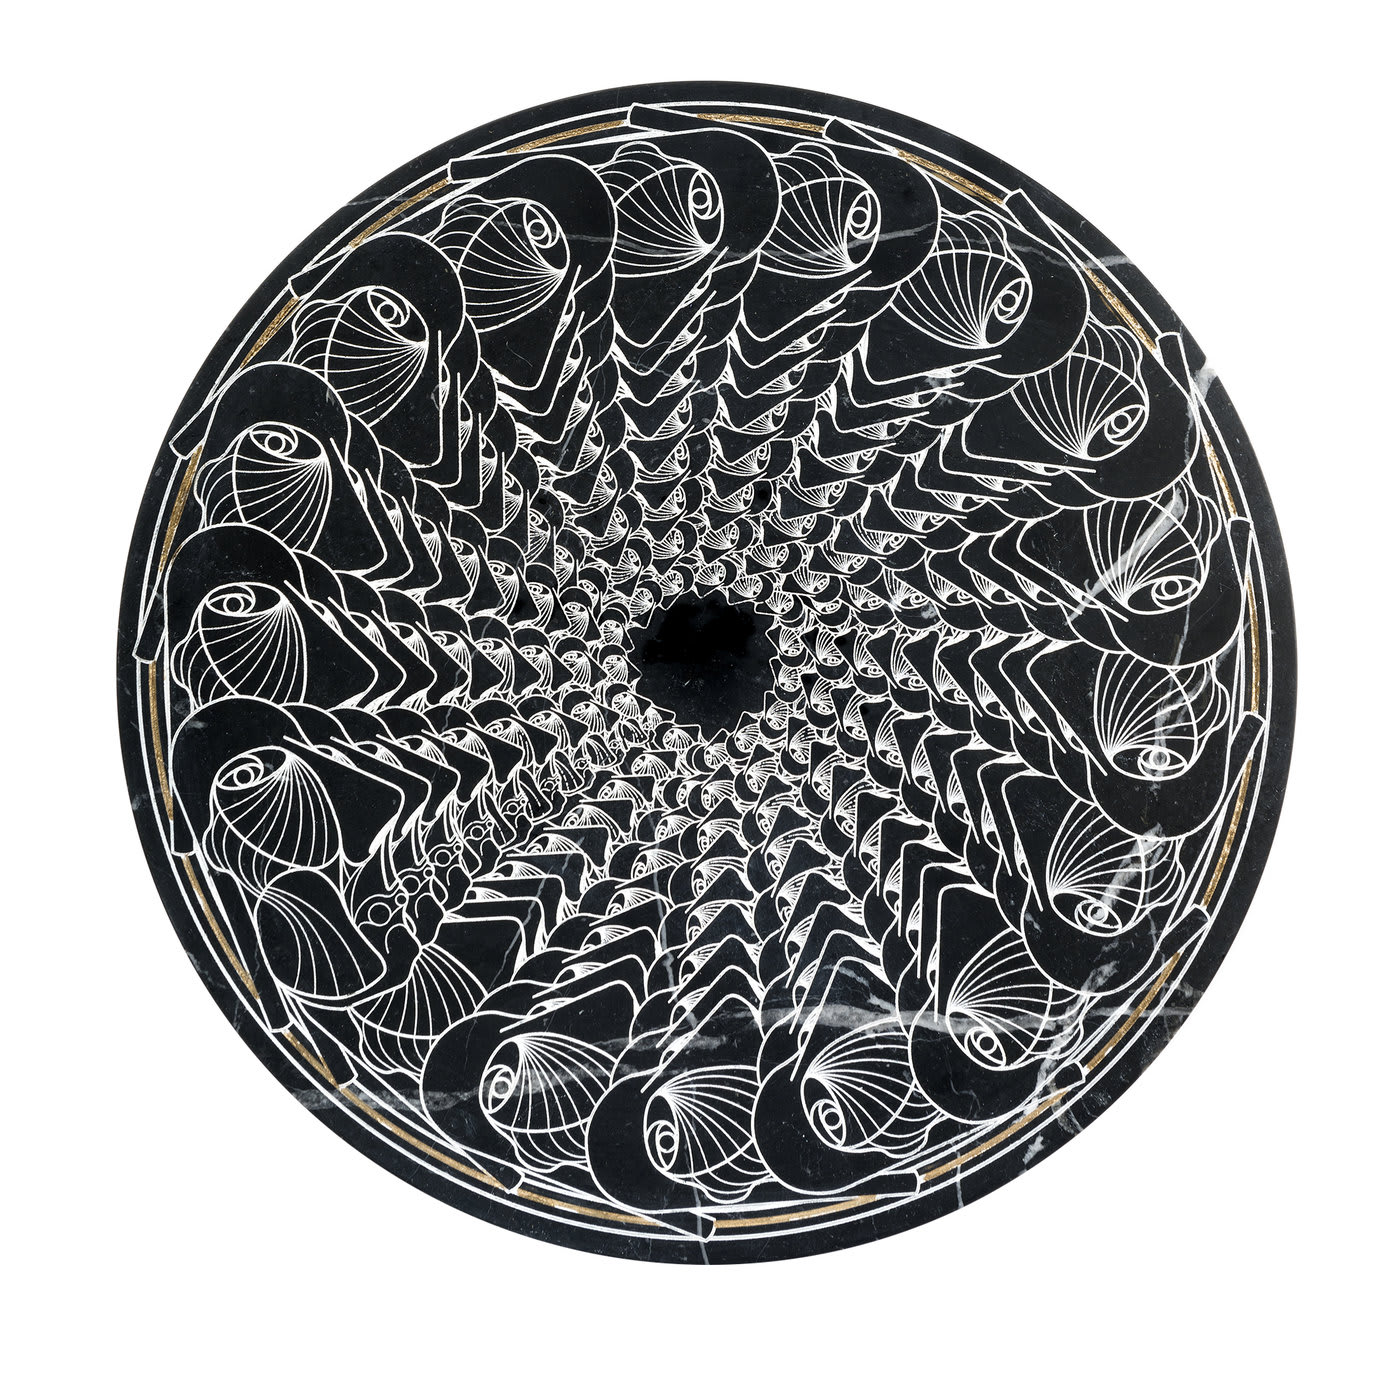 Marblelous IV Plate by Federico Pepe - Editions Milano